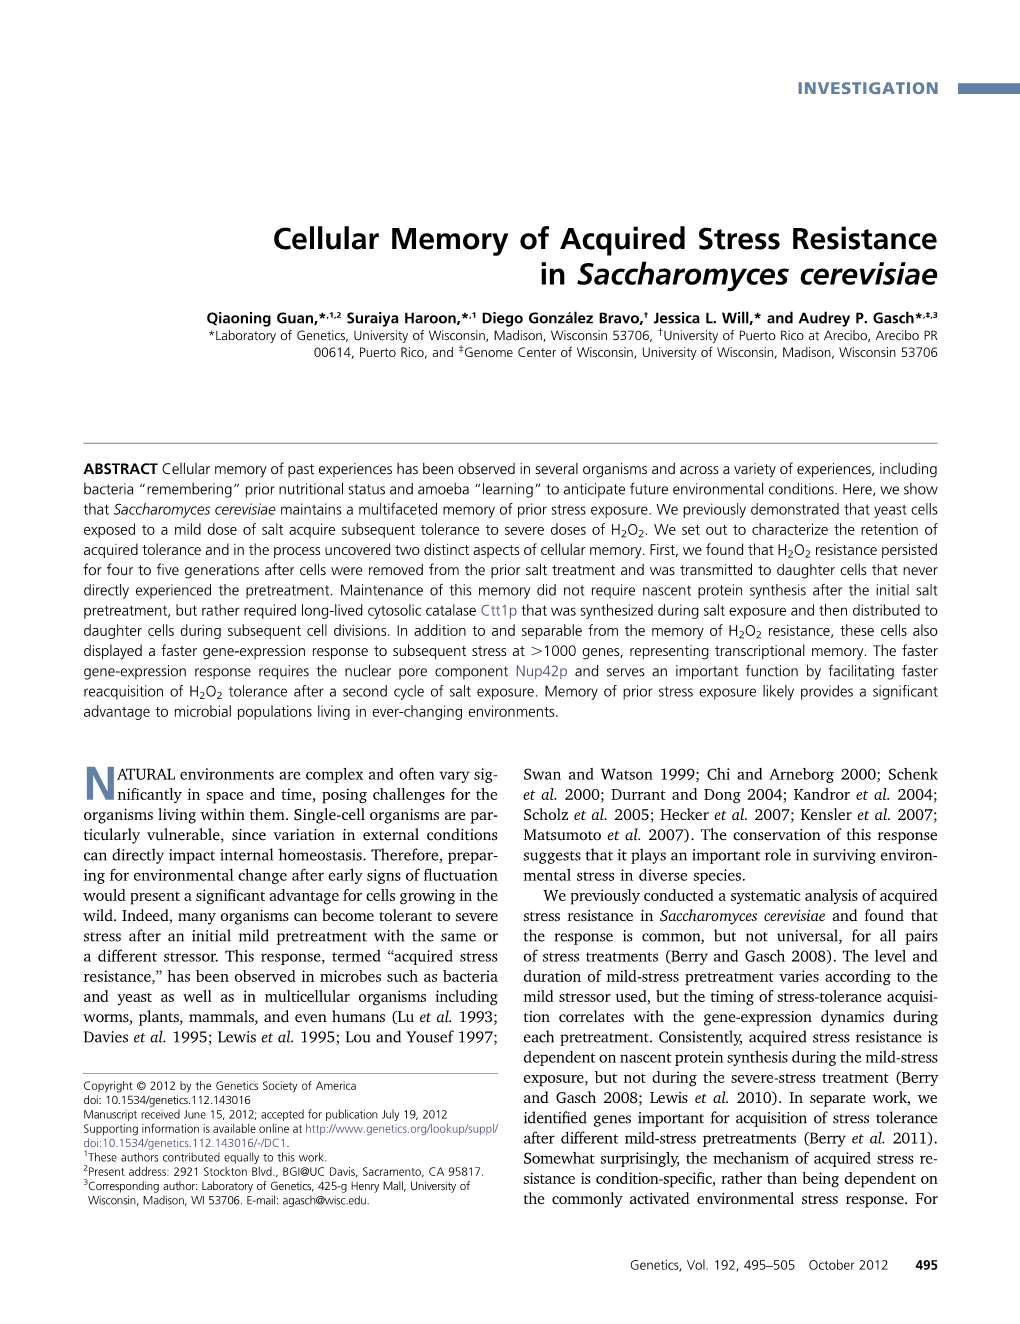 Cellular Memory of Acquired Stress Resistance in Saccharomyces Cerevisiae